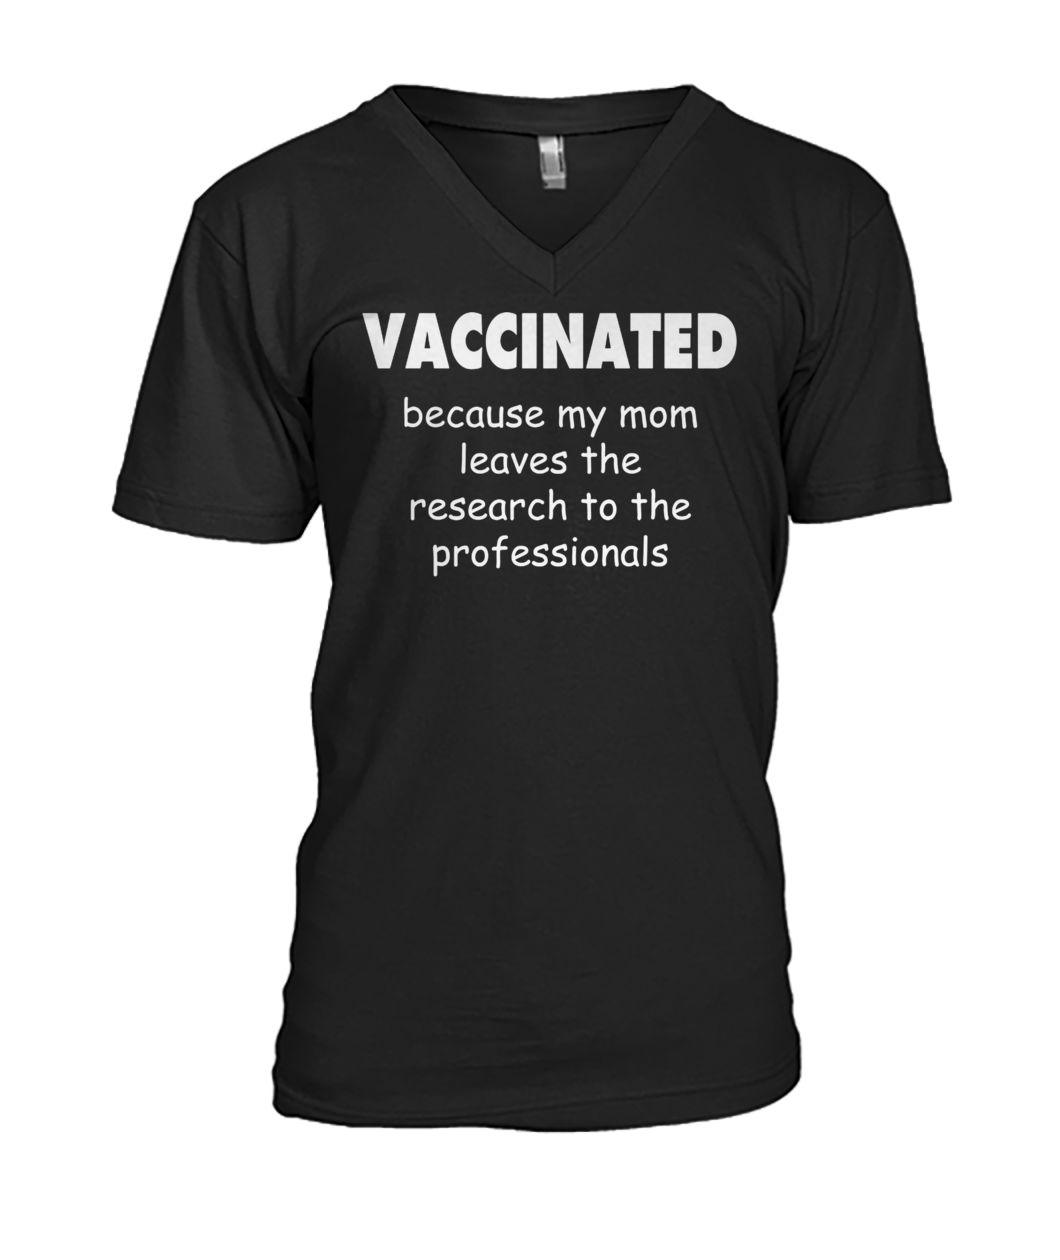 Vaccinated because my mom leaves the research to the professionals mens v-neck